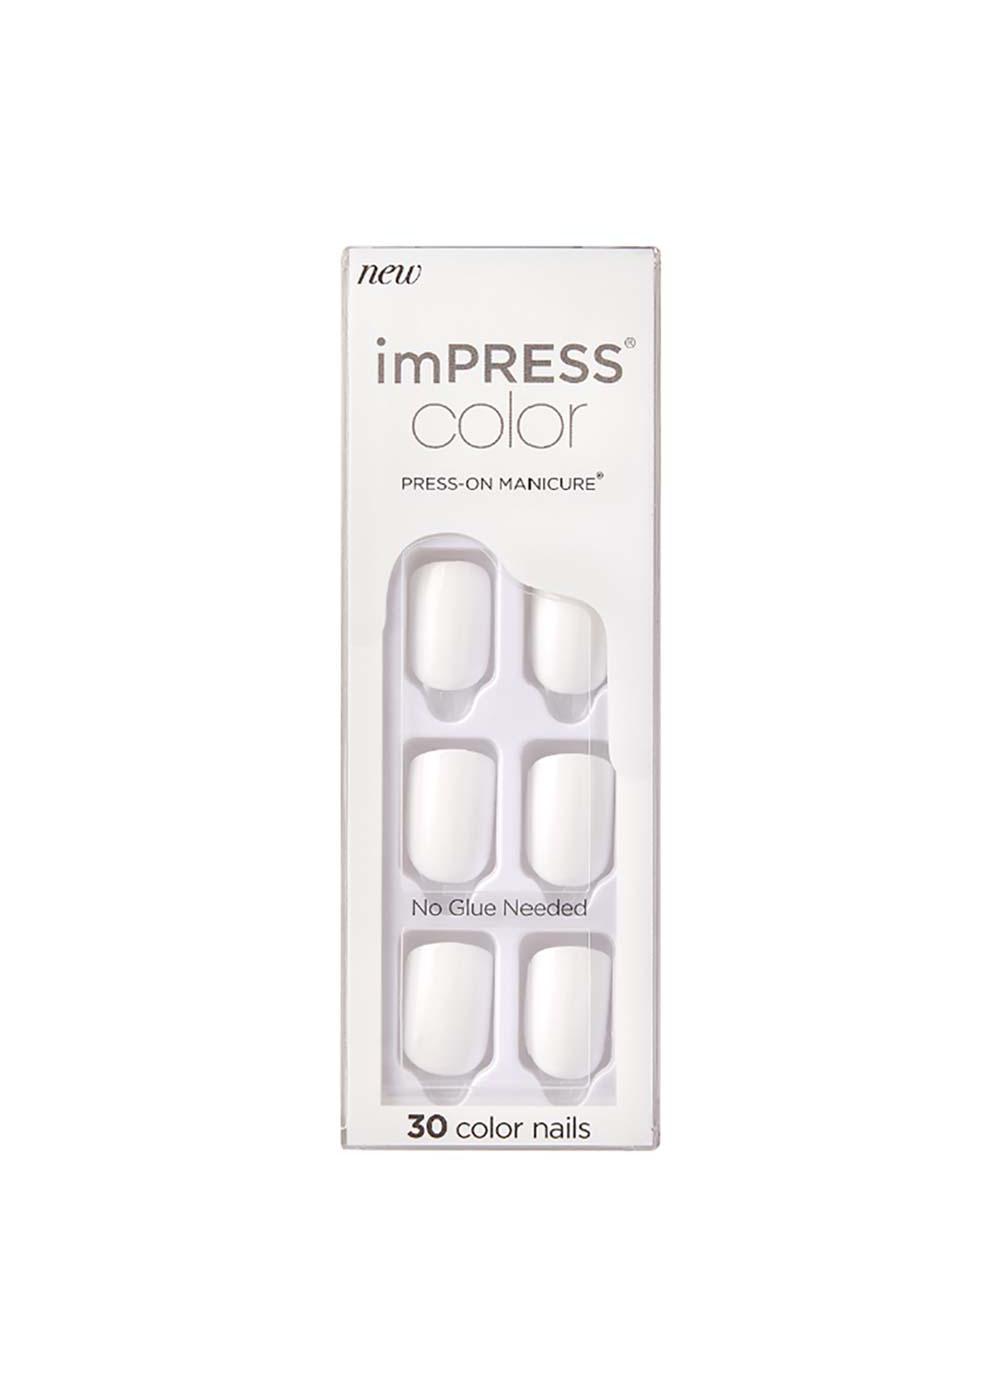 KISS imPRESS Color Press-On Manicure Frosting; image 1 of 2